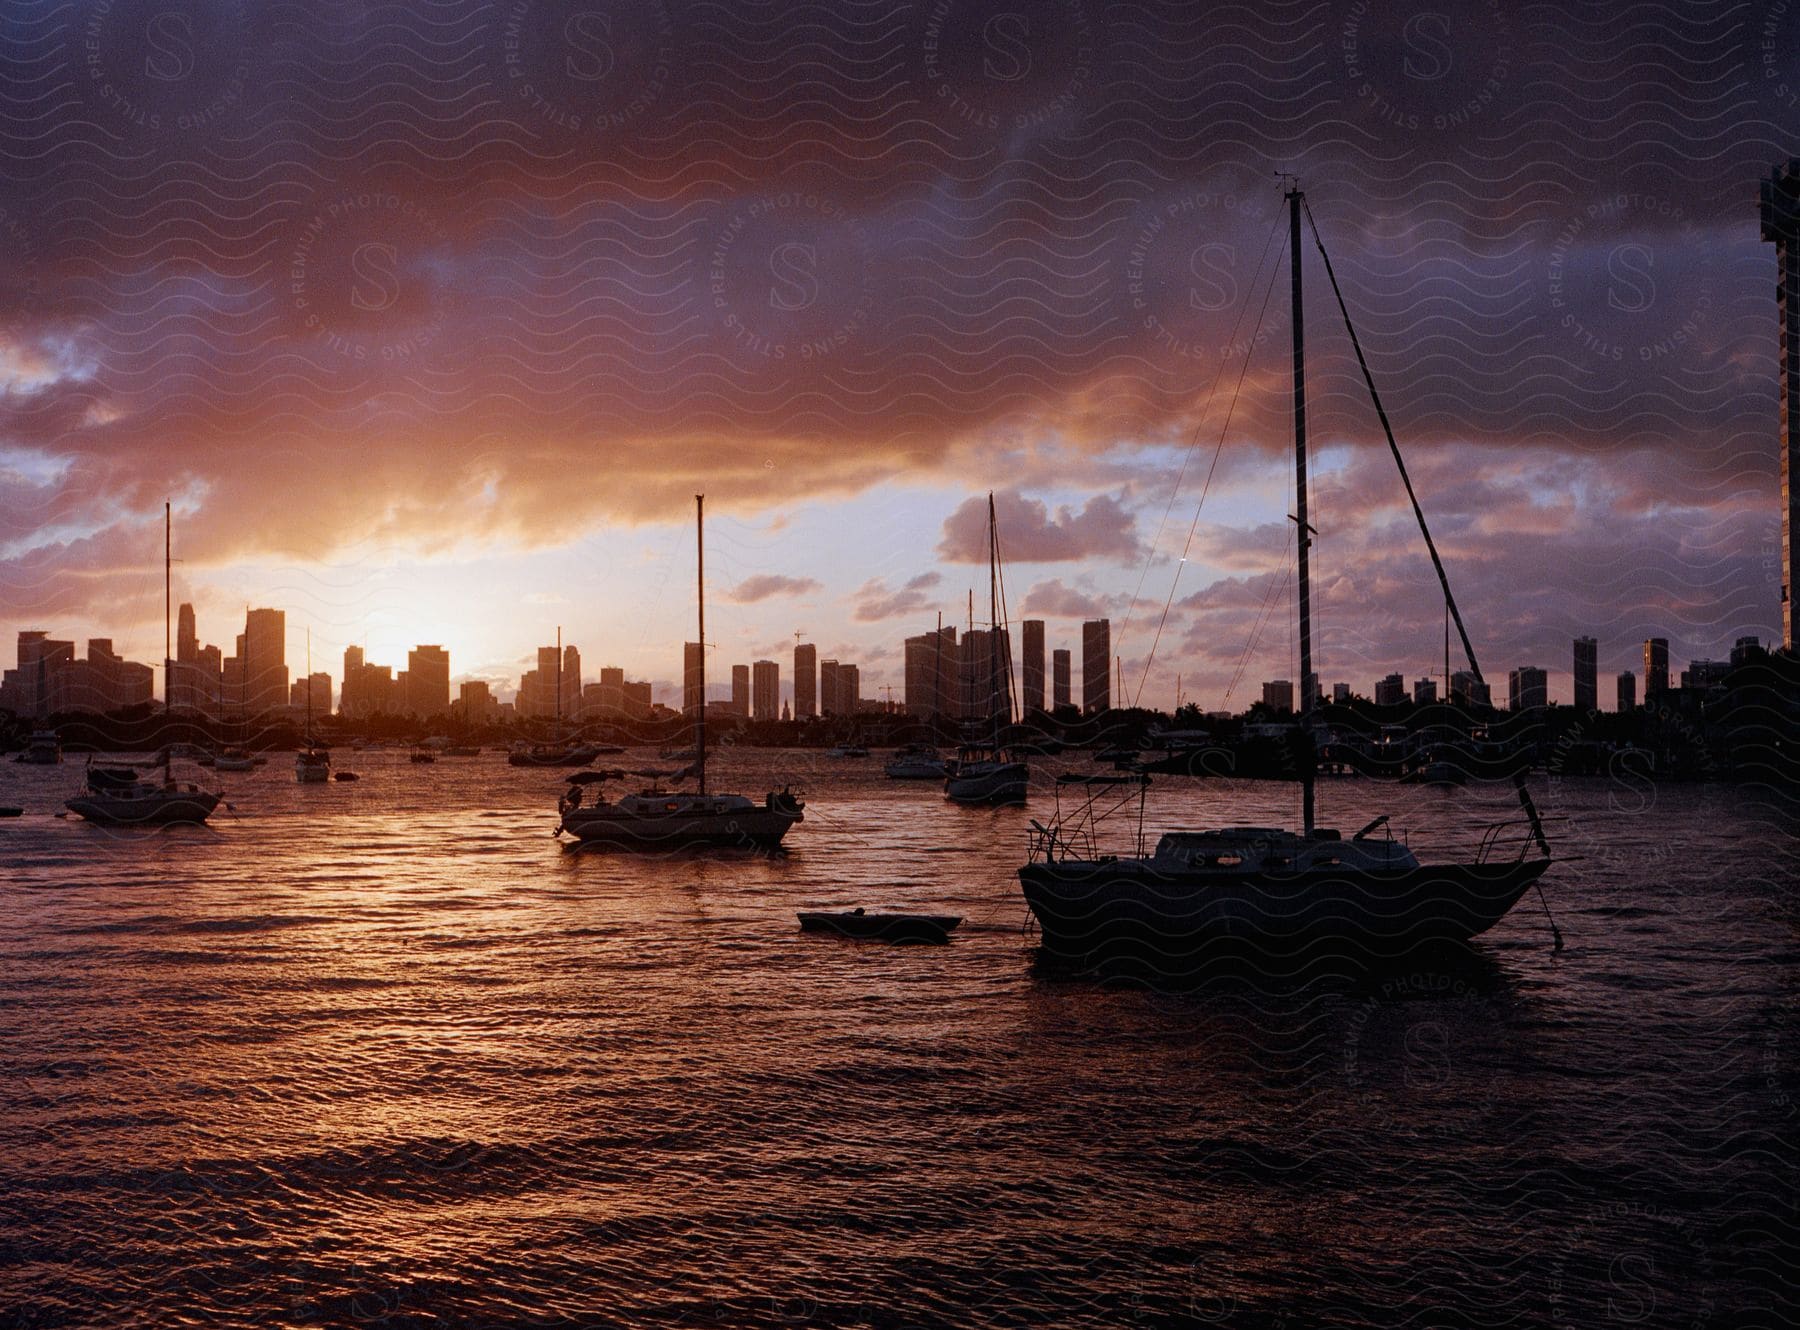 Boats sail in the water as the sun shines on the horizon behind city buildings and skyscrapers